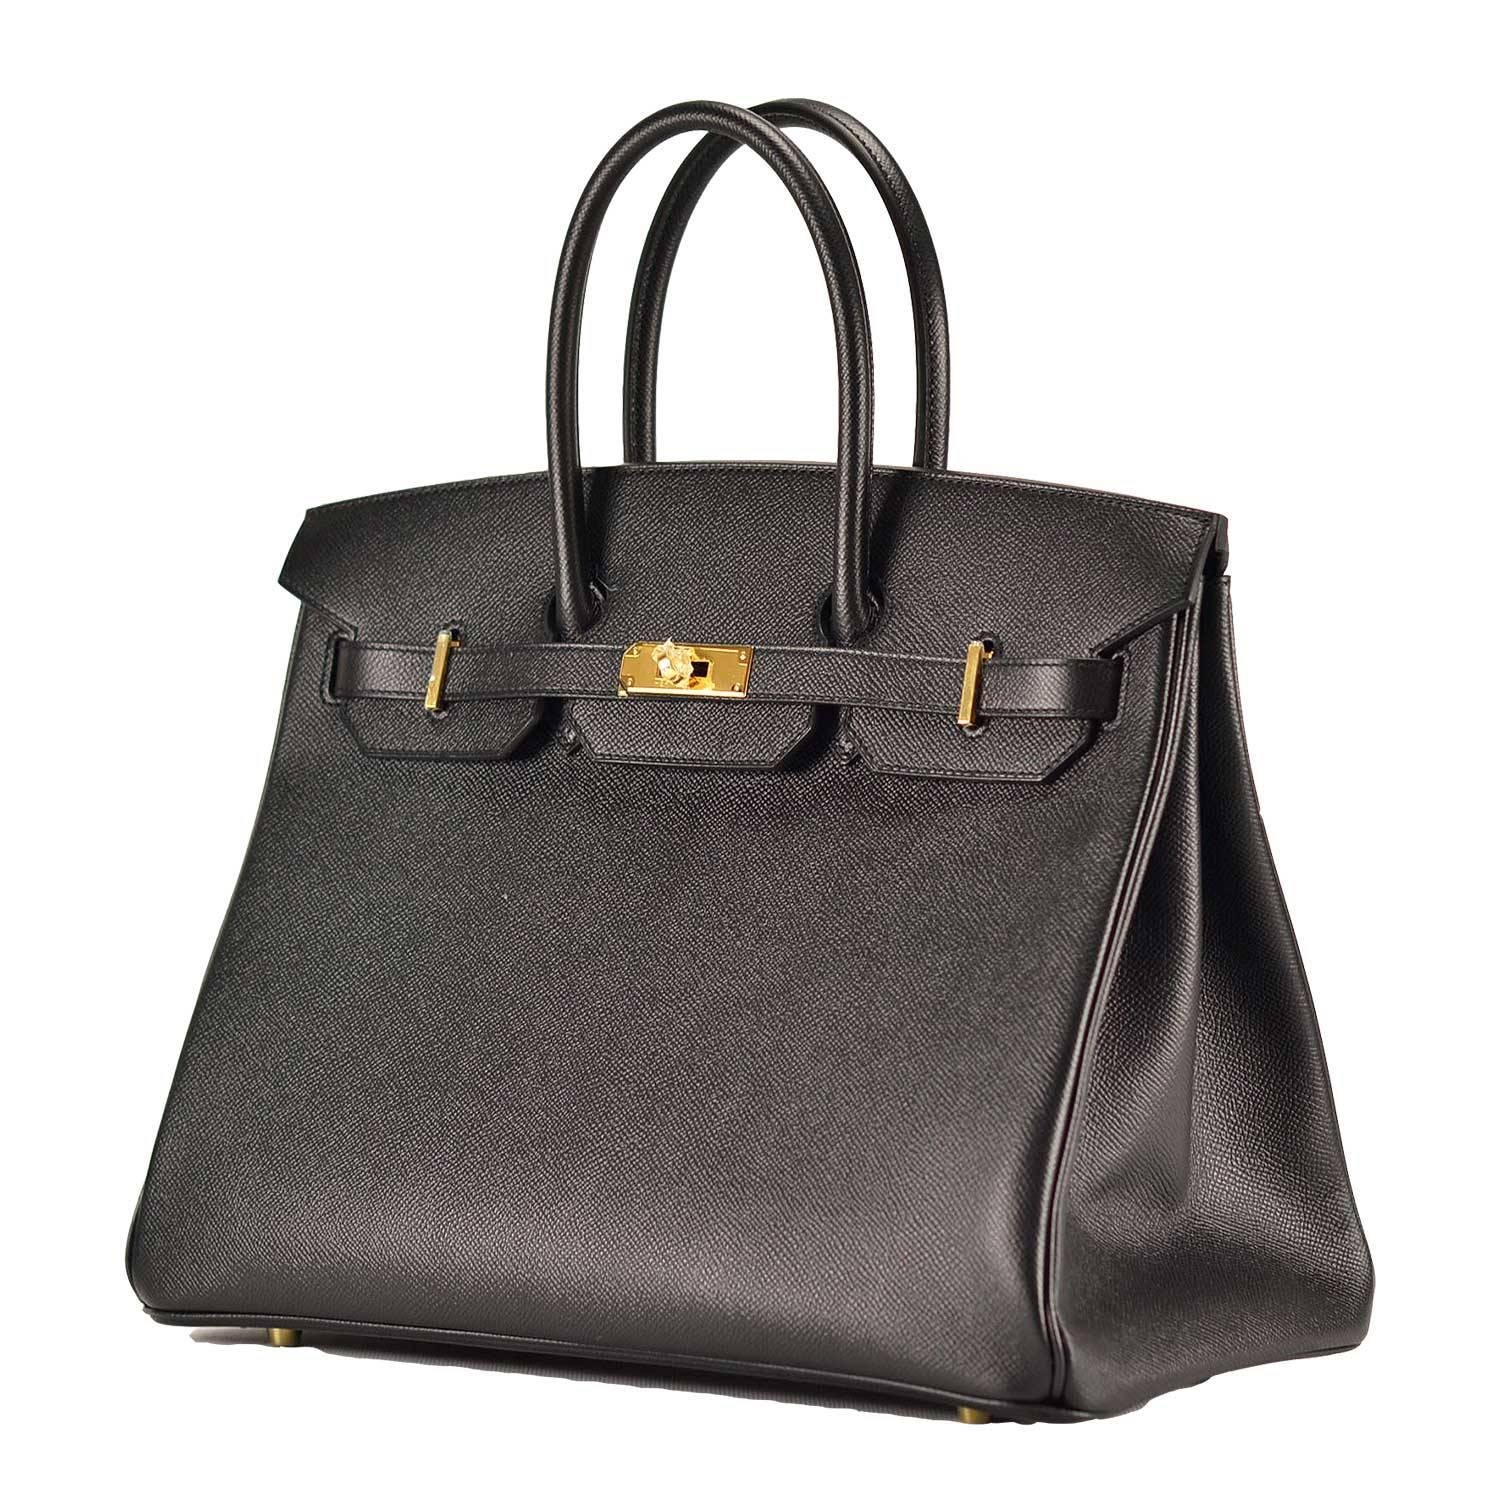 Hermes Birkin 35 Epsom Black Gold Hardware

Pre-owned and never used.

Bought it in Hermes store.

Model: Birkin

Dimensions: 35cm width x 25cm height x 18cm length.

Color: Black

Details:
*Protective felt removed for purposes of